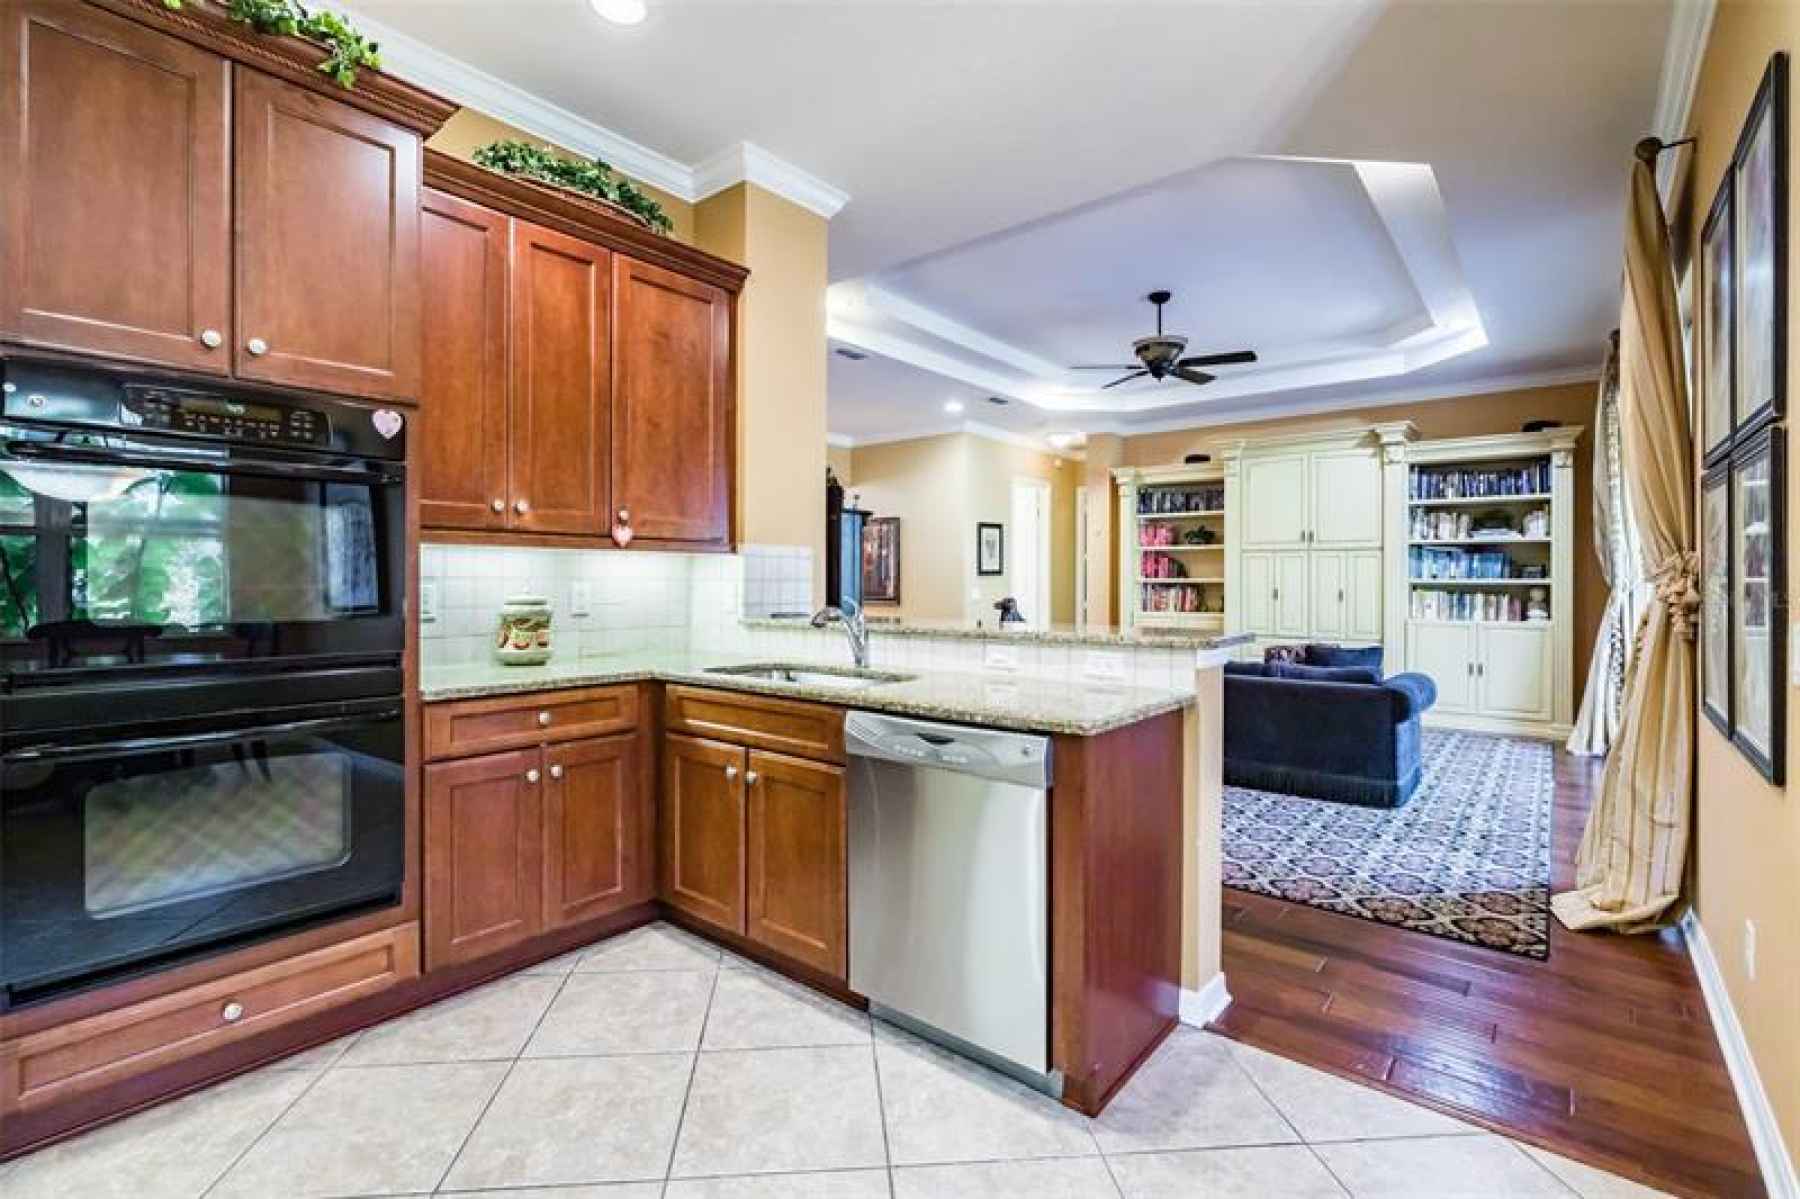 Kitchen features granite counters, solid maple cabinetry, double ovens, and a Pantry.